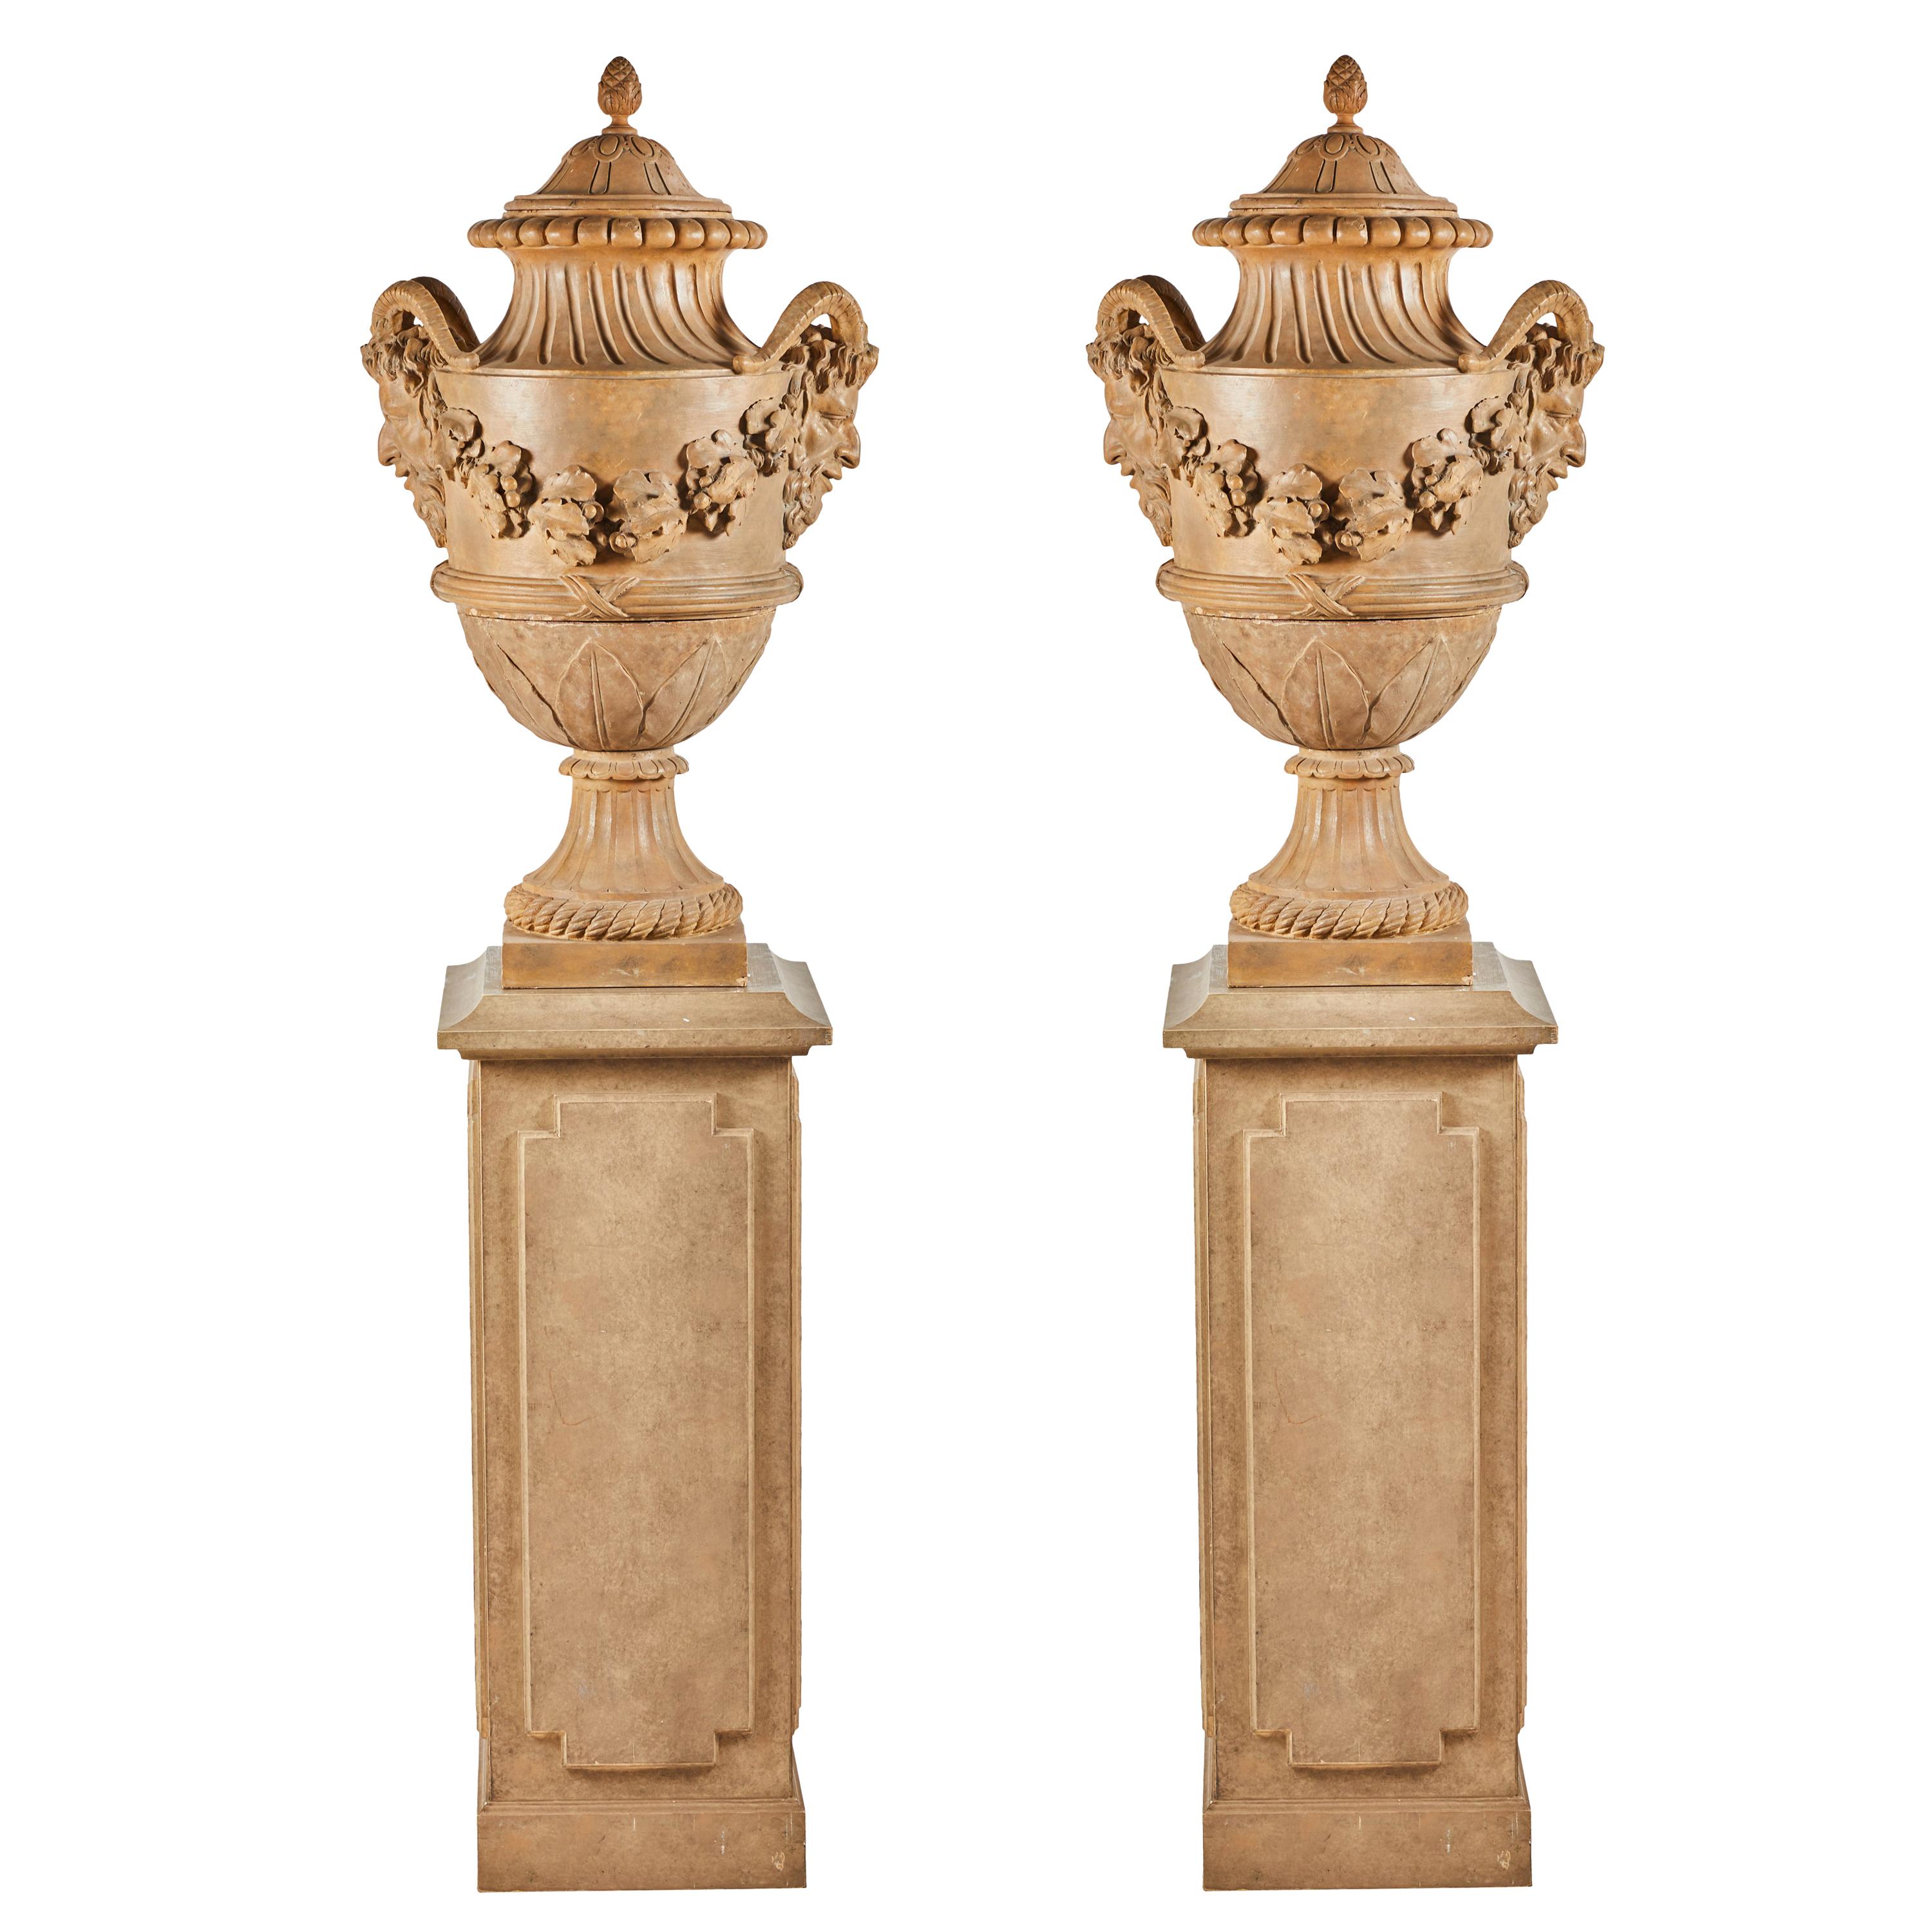 18th Century Terracotta Urns on Pedestals from the Collection of Karl Lagerfeld For Sale